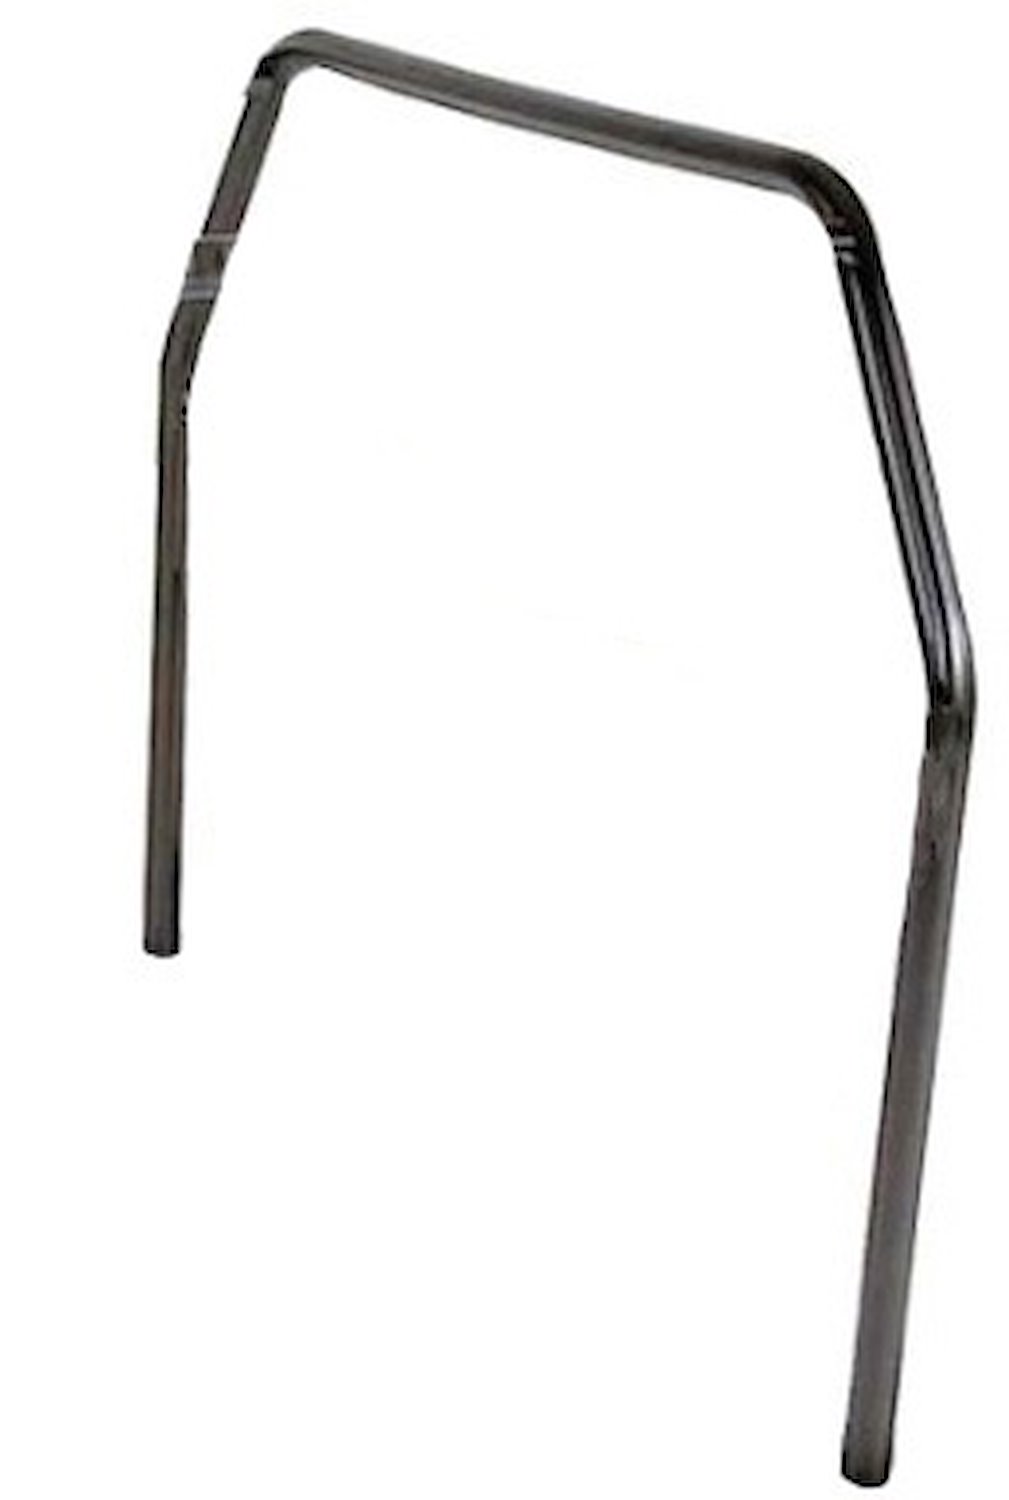 Roll Cage Hoop for 1955-1957 Chevy